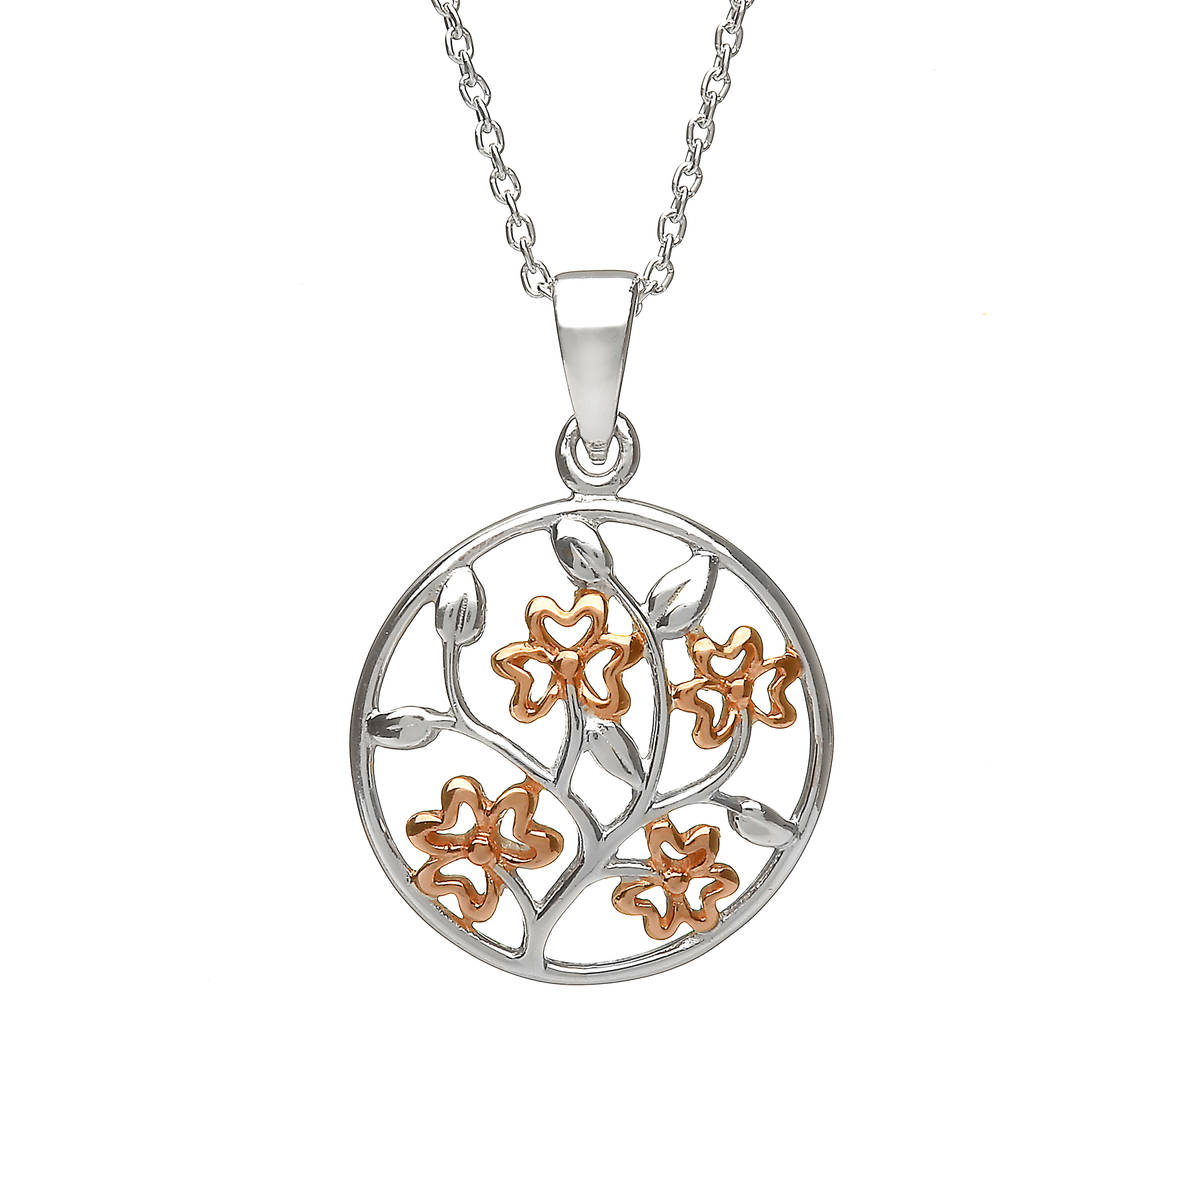 Silver Celtic Circle With Rose Gold Plated Shamrocks In Centre Pendant
